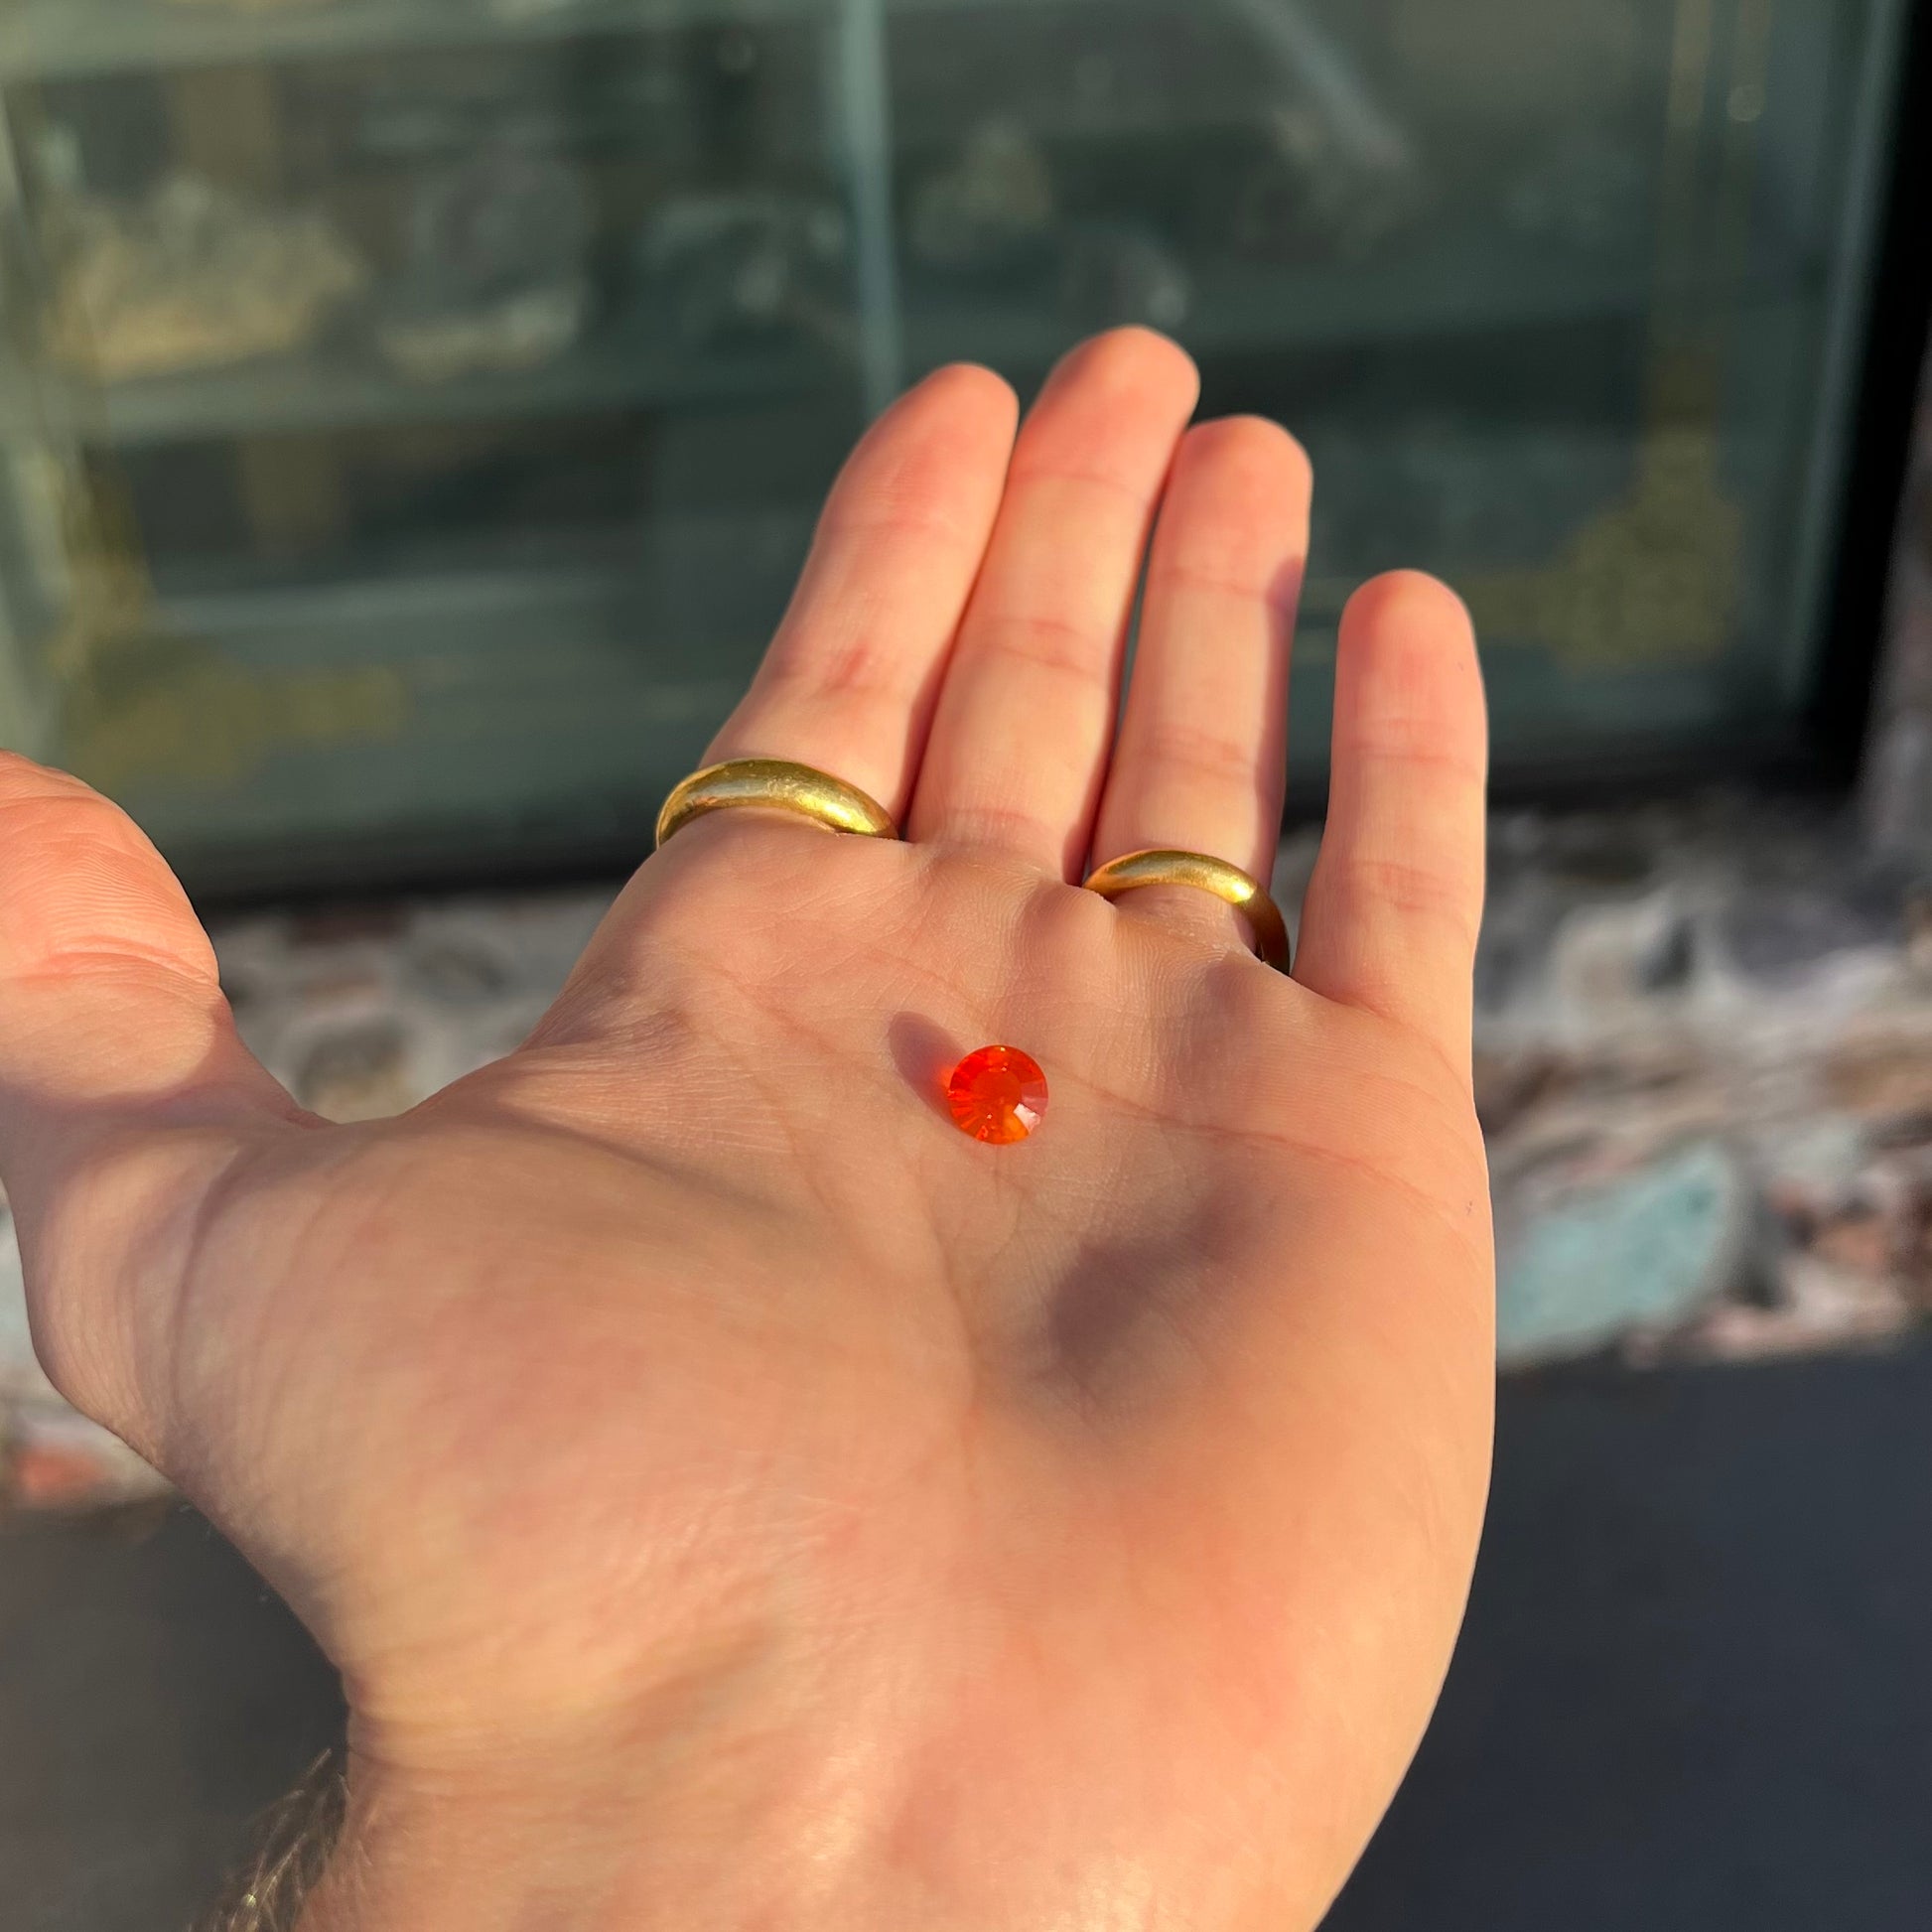 A faceted round cut natural fire opal from Mexico.  The stone is a bright orange color.